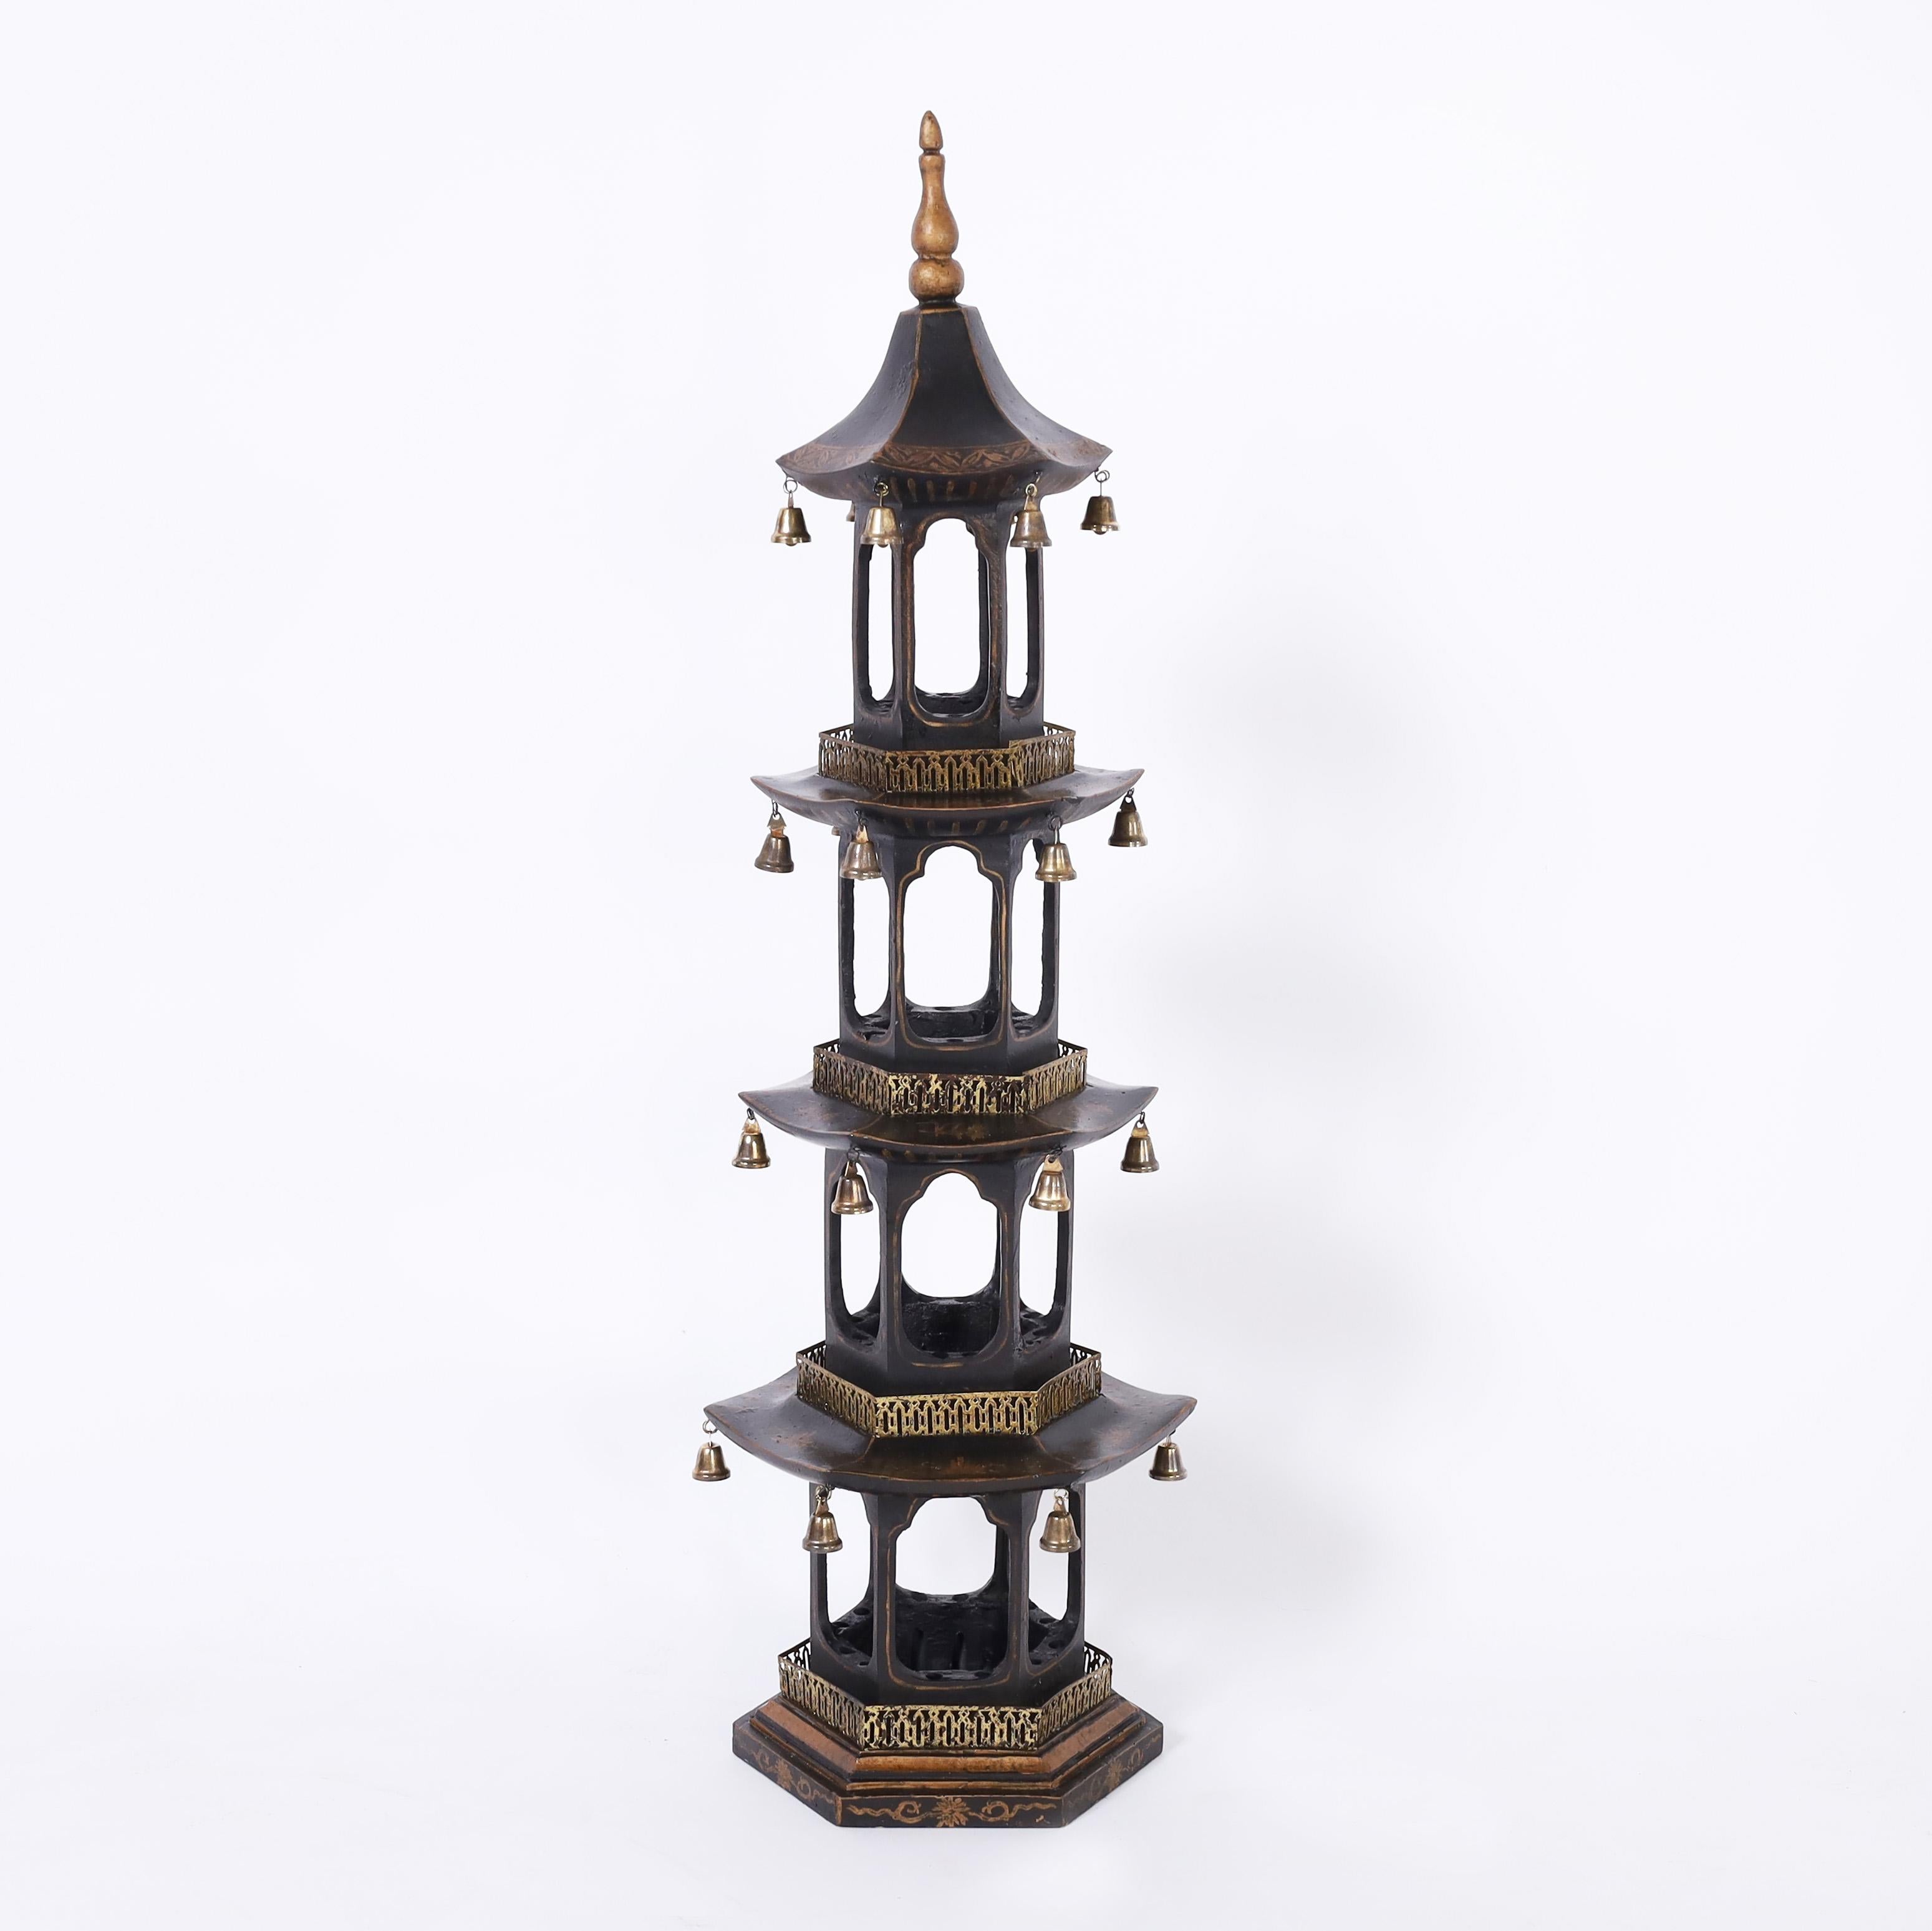 Striking pair of four tiered pagoda towers crafted in composition with a black lacquer finish decorated with gold painted floral designs, brass balconies, and bells.